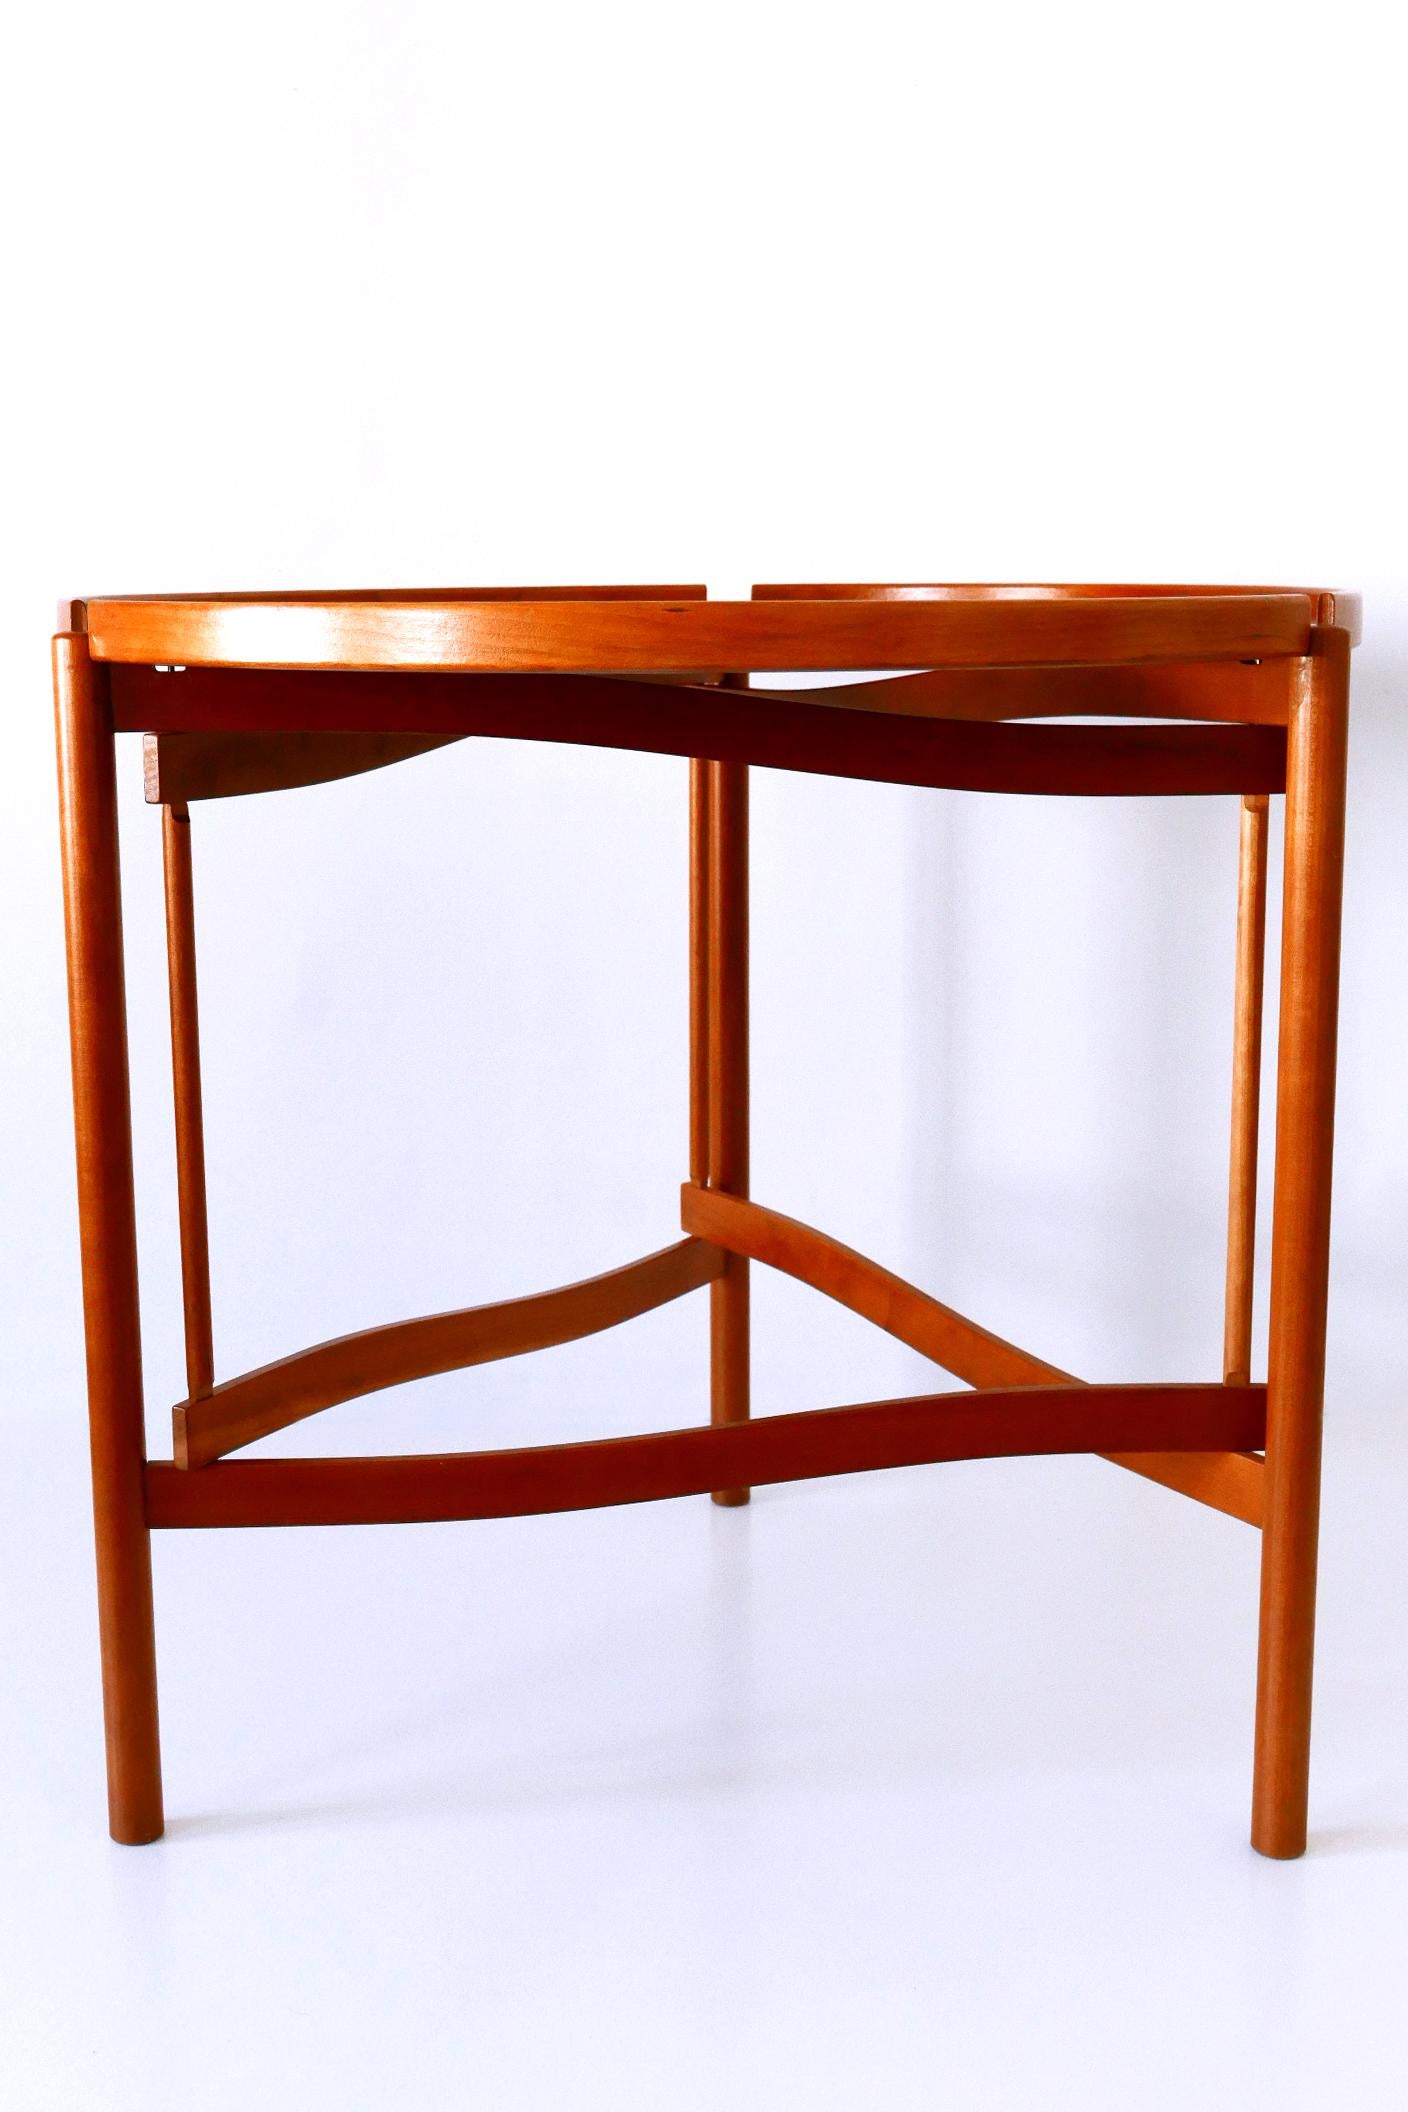 Exceptional Side Table Tema by Hans Johansson for Karl Andersson & Söner Sweden For Sale 1